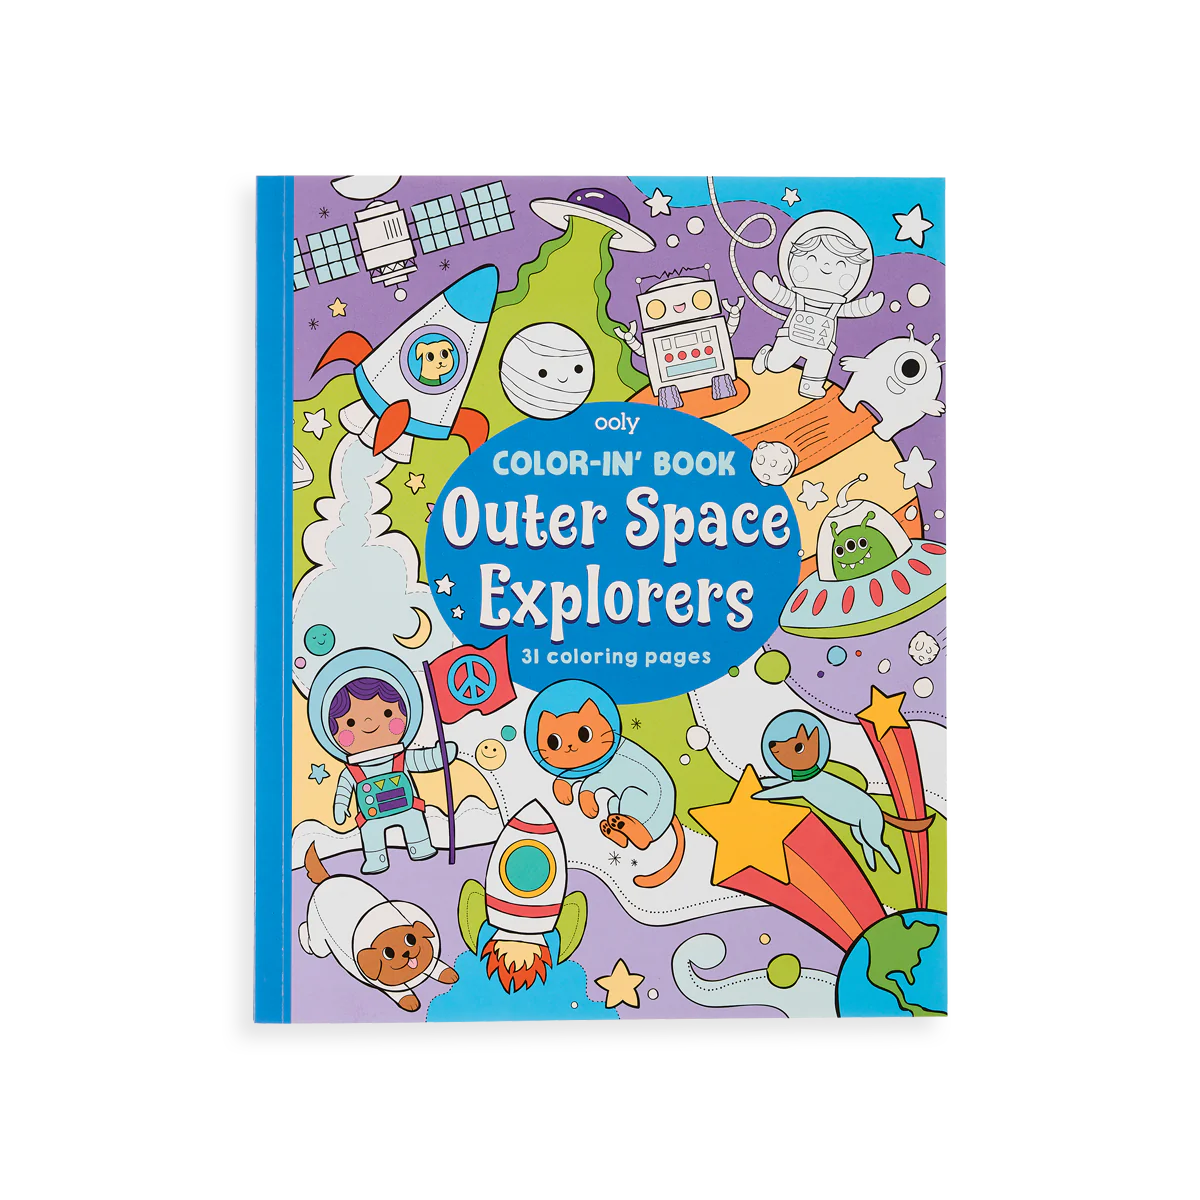 Color-In' Book: Outer Space Explorers